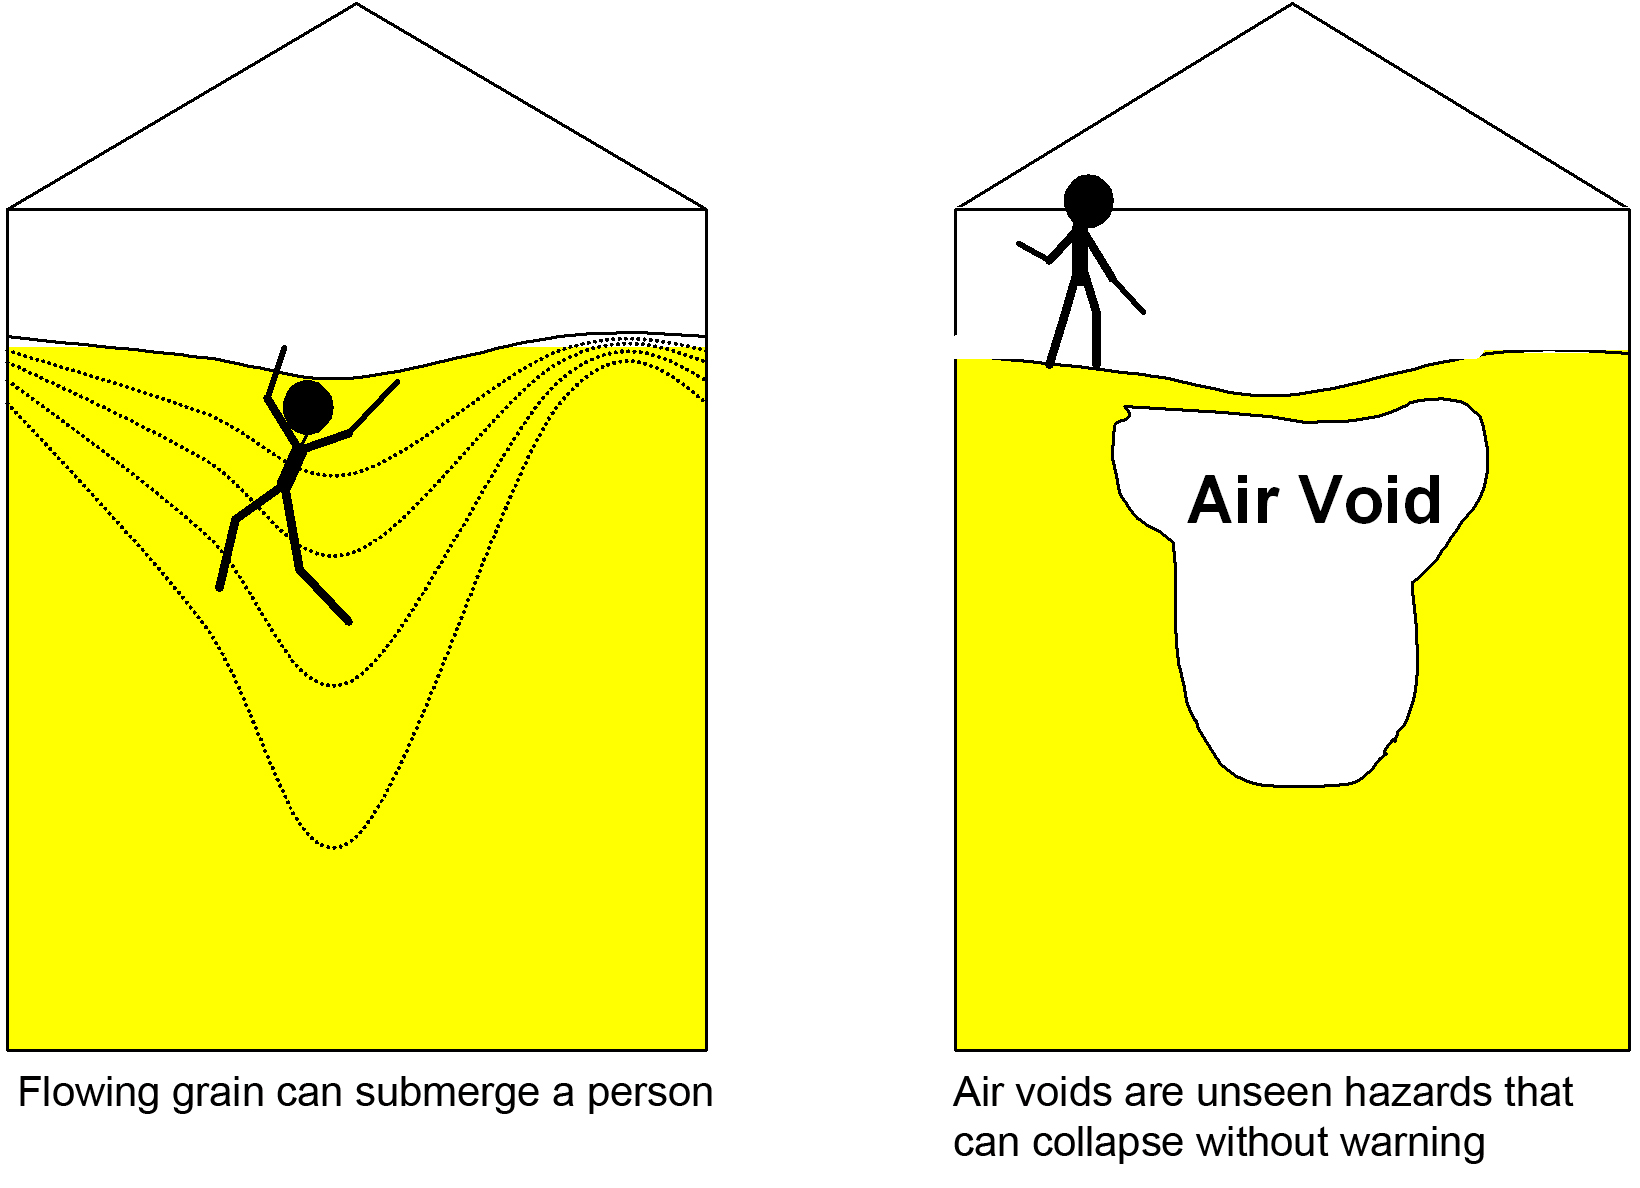 Flowing grain can submerge a person. Air voids are unseen hazards that can collapse without warning.